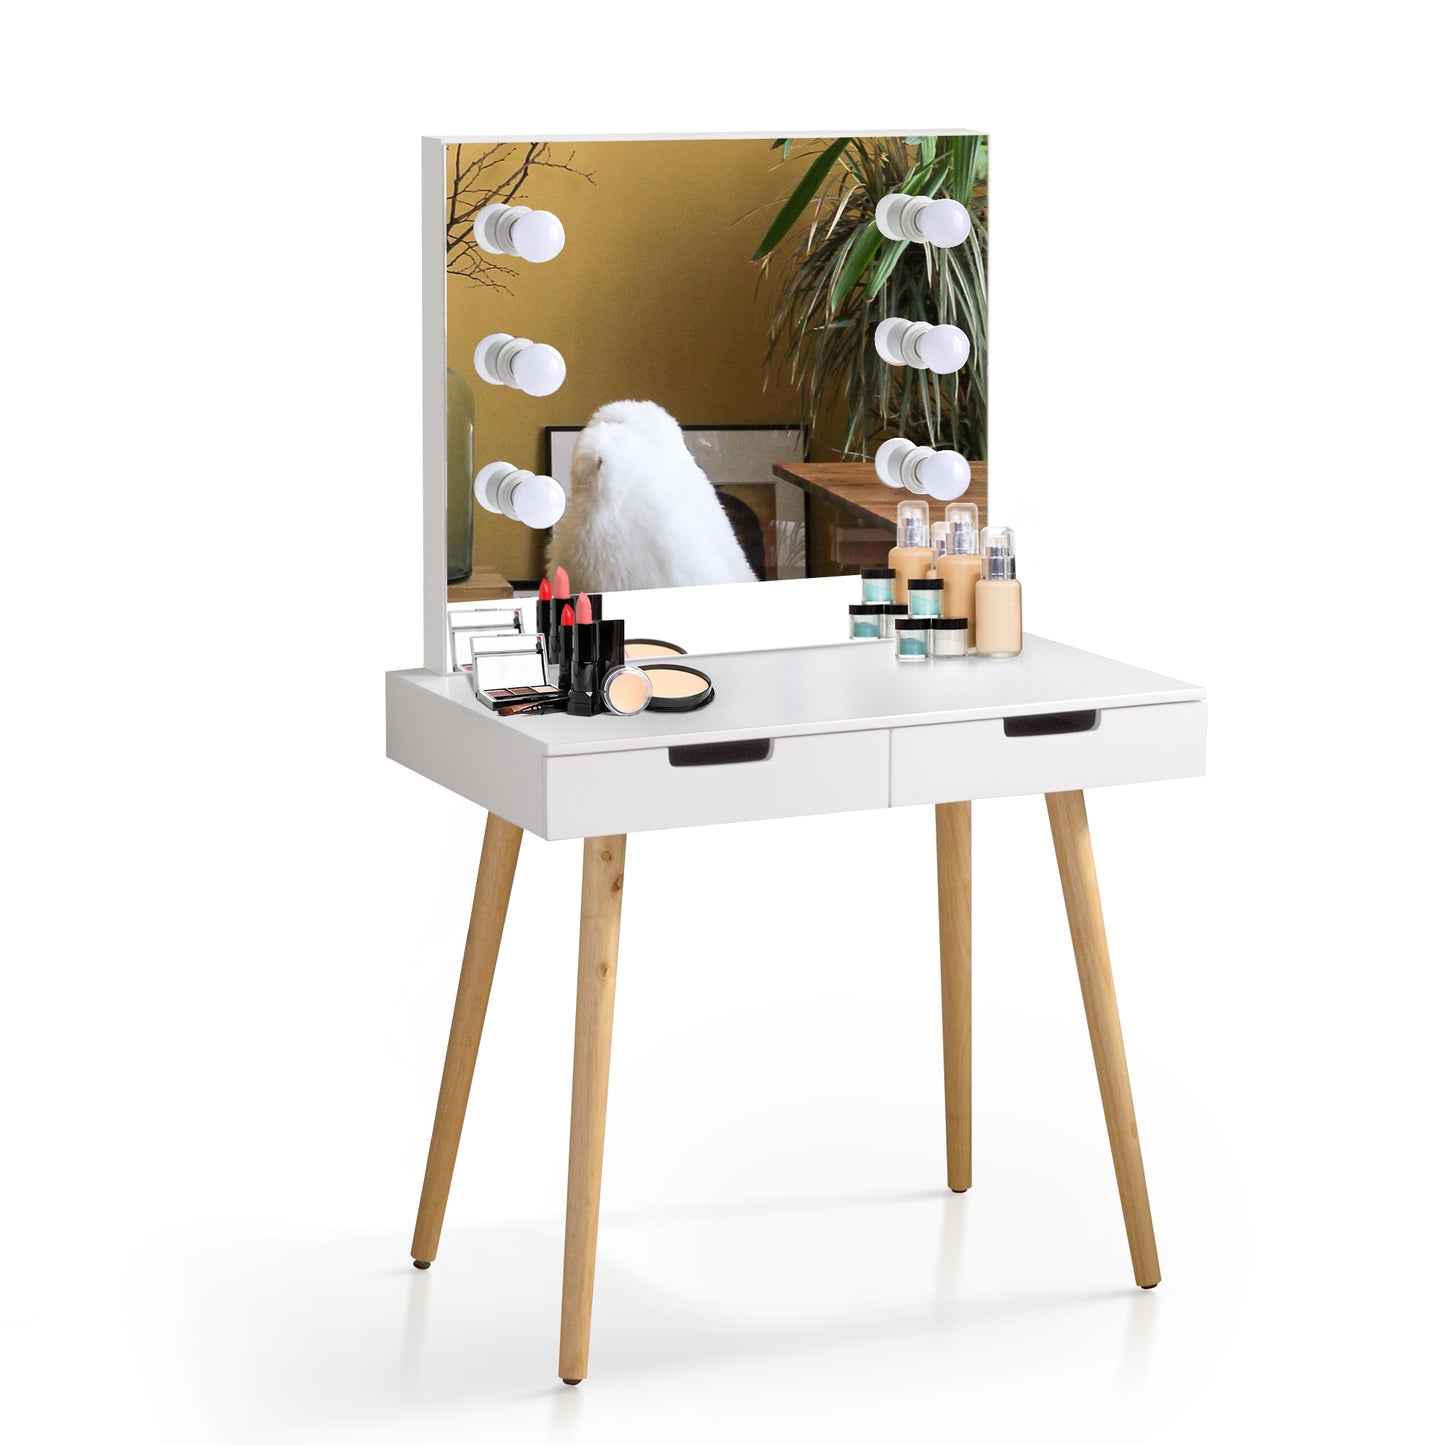 Wooden Vanity Table Makeup Dressing Desk with LED Light,dressing table with USB port,White